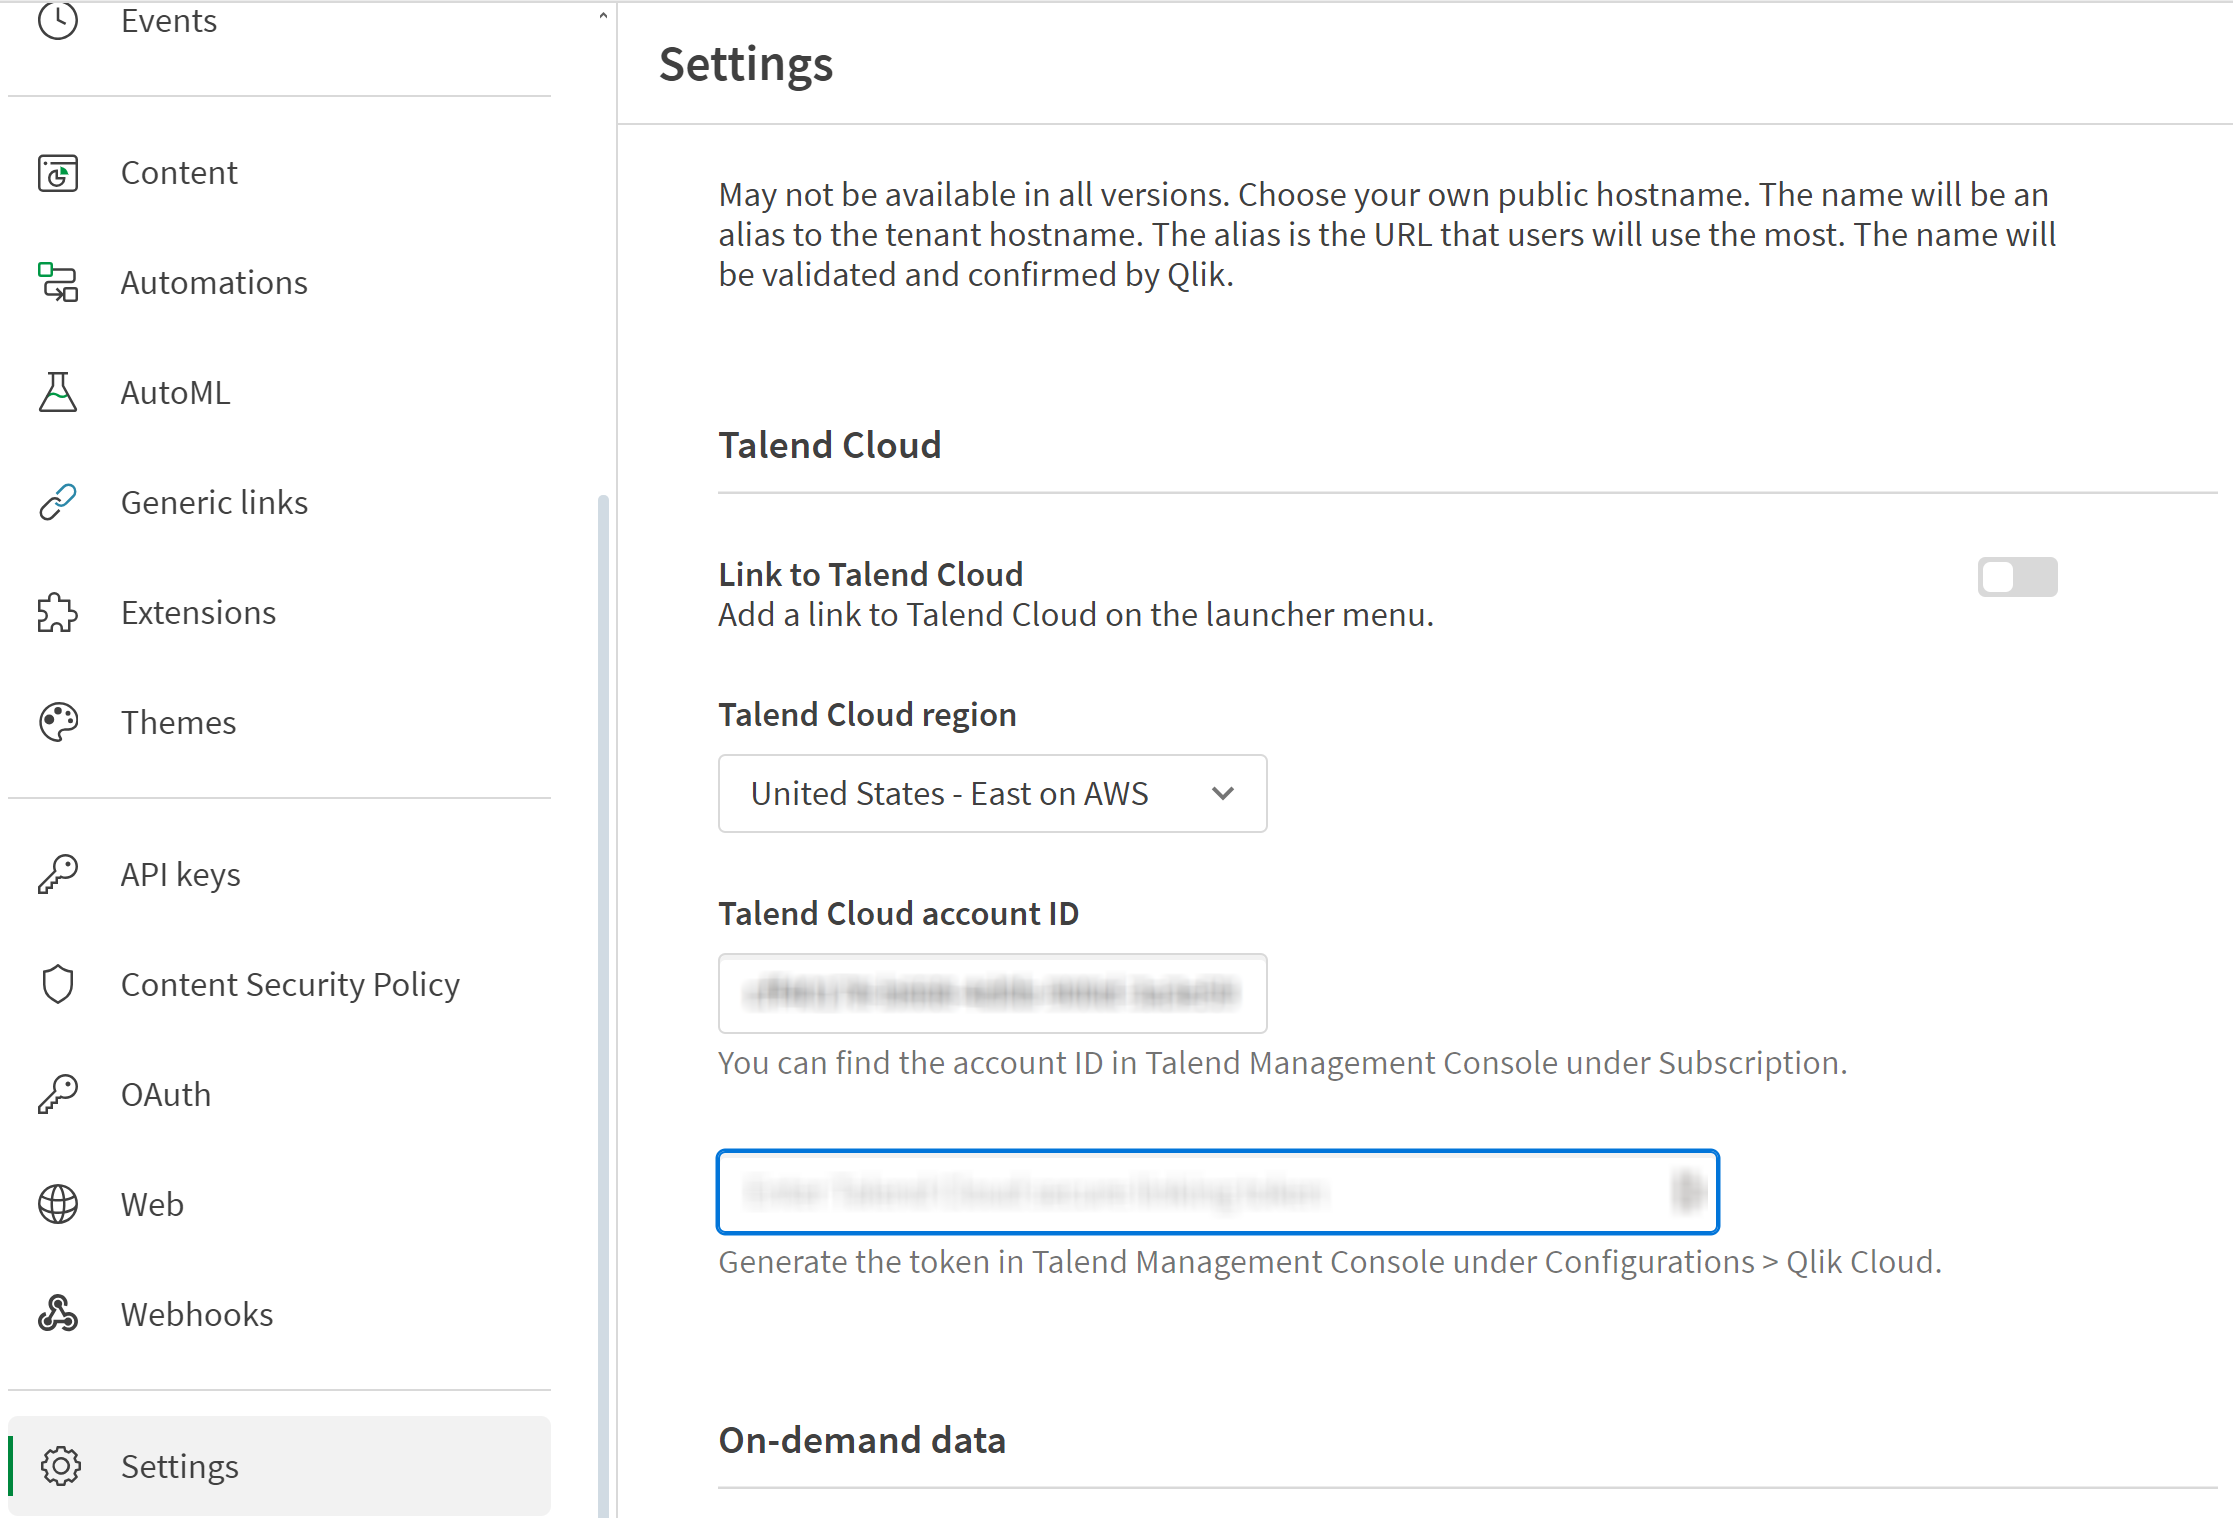 Settings pane showing settings for Talend Cloud